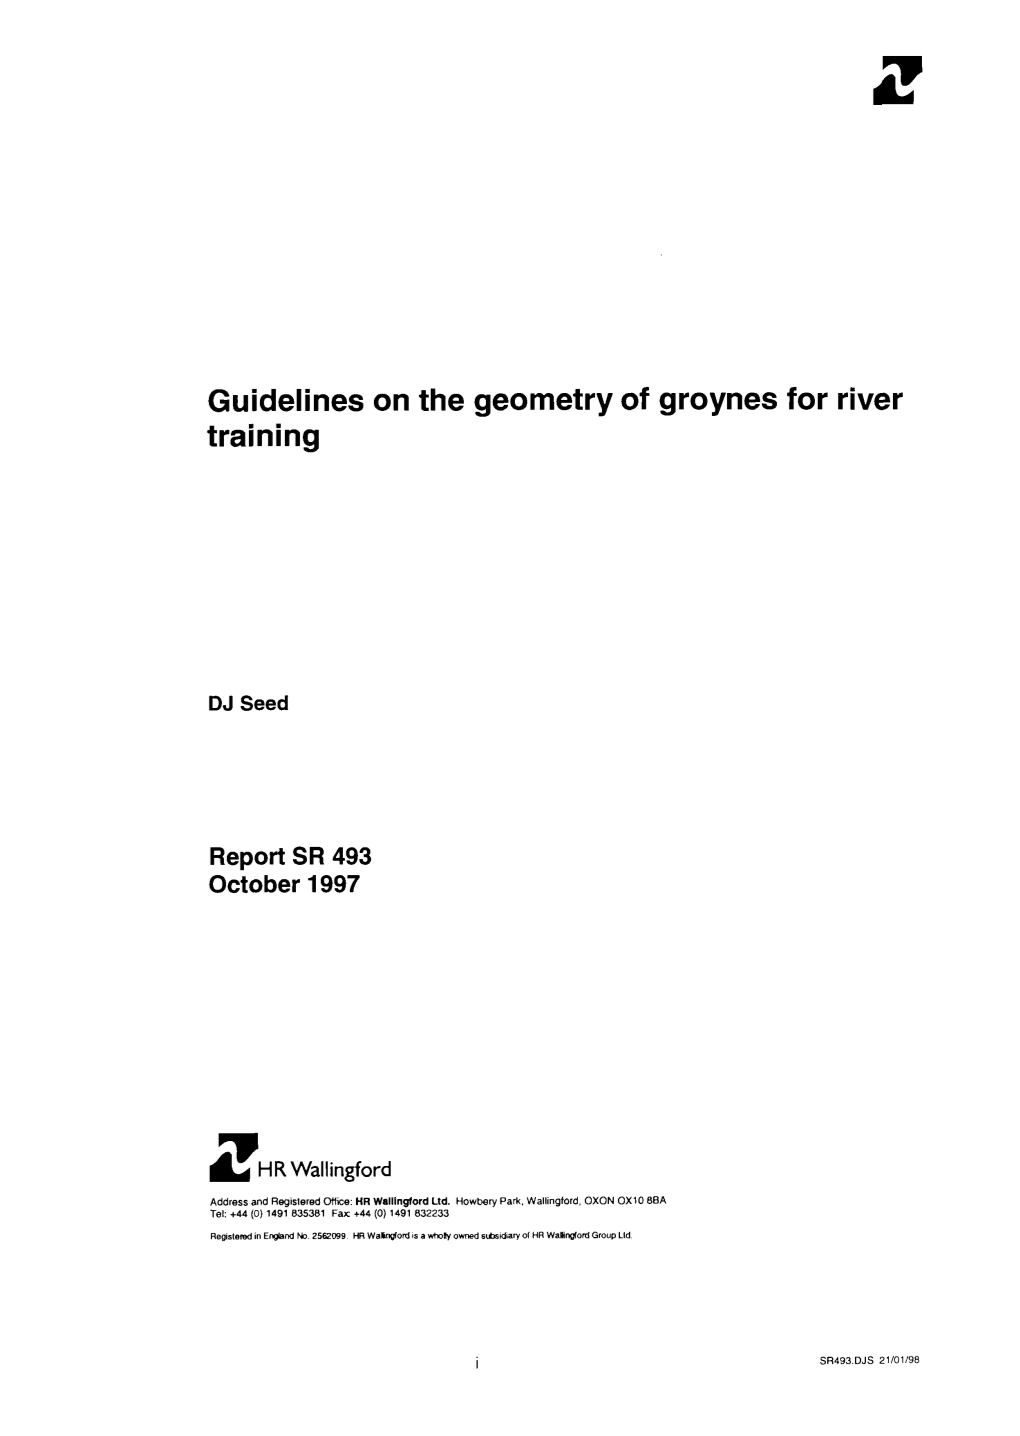 Guidelines on the Geometry of Groynes for River Training